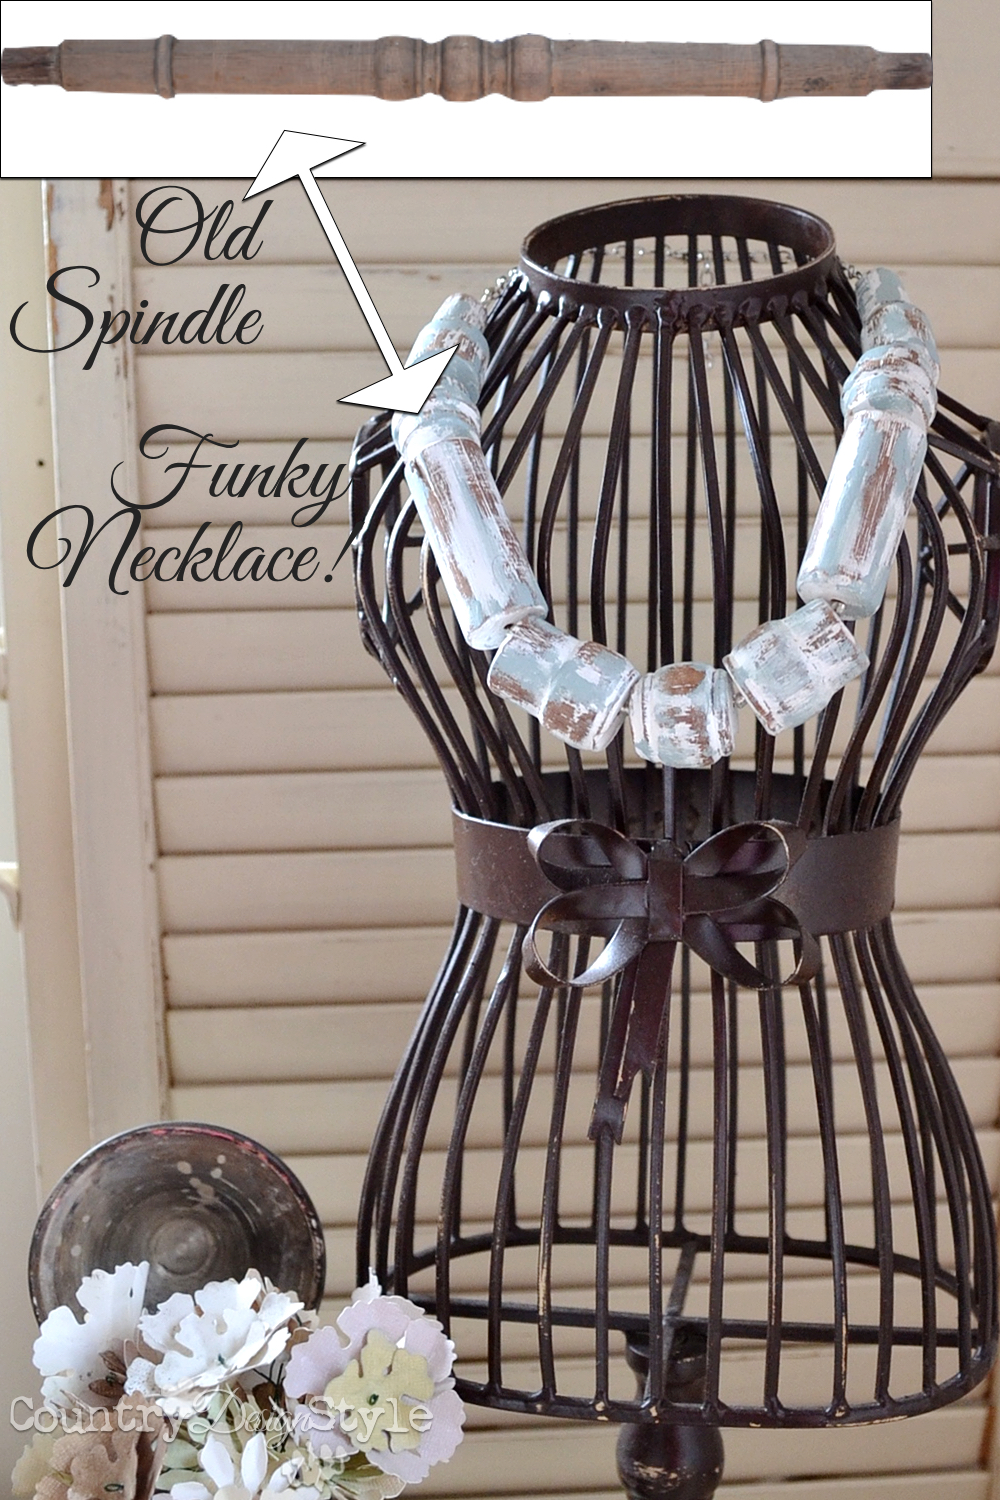 old-spindle-funky-necklace-country-design-style-pn